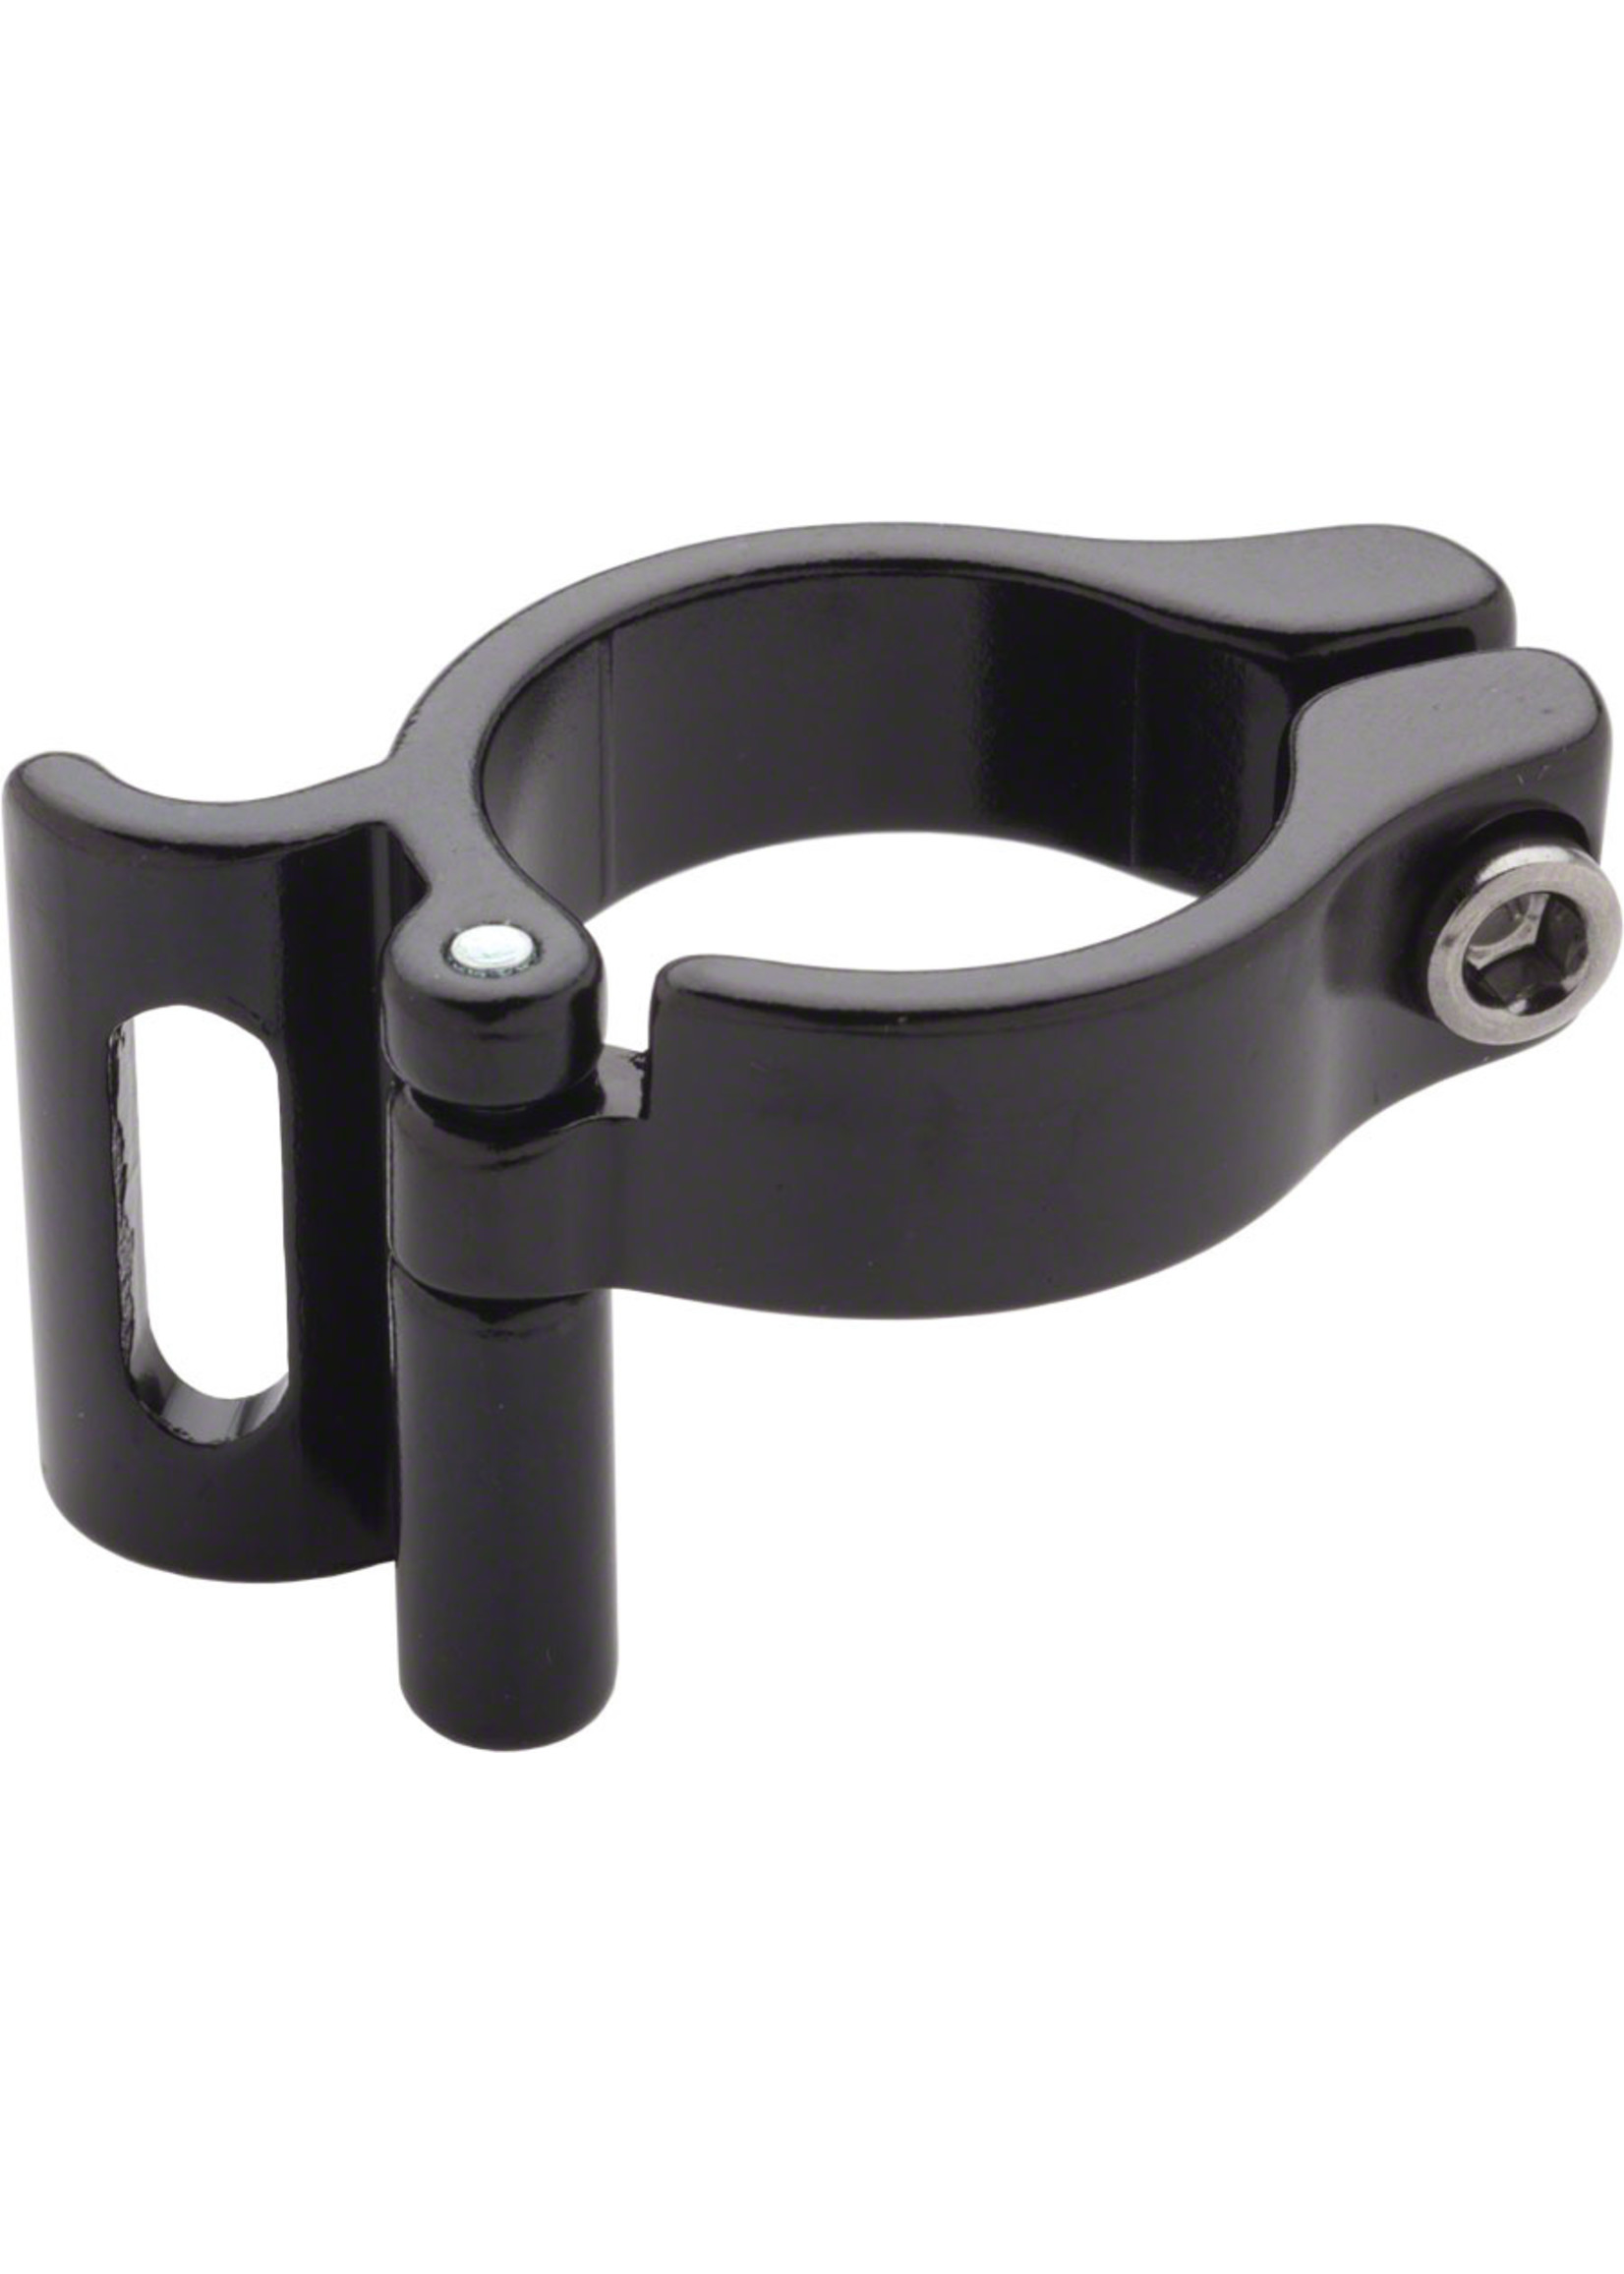 Problem Solvers Braze-on Adaptor Clamp 28.6mm Slotted Black